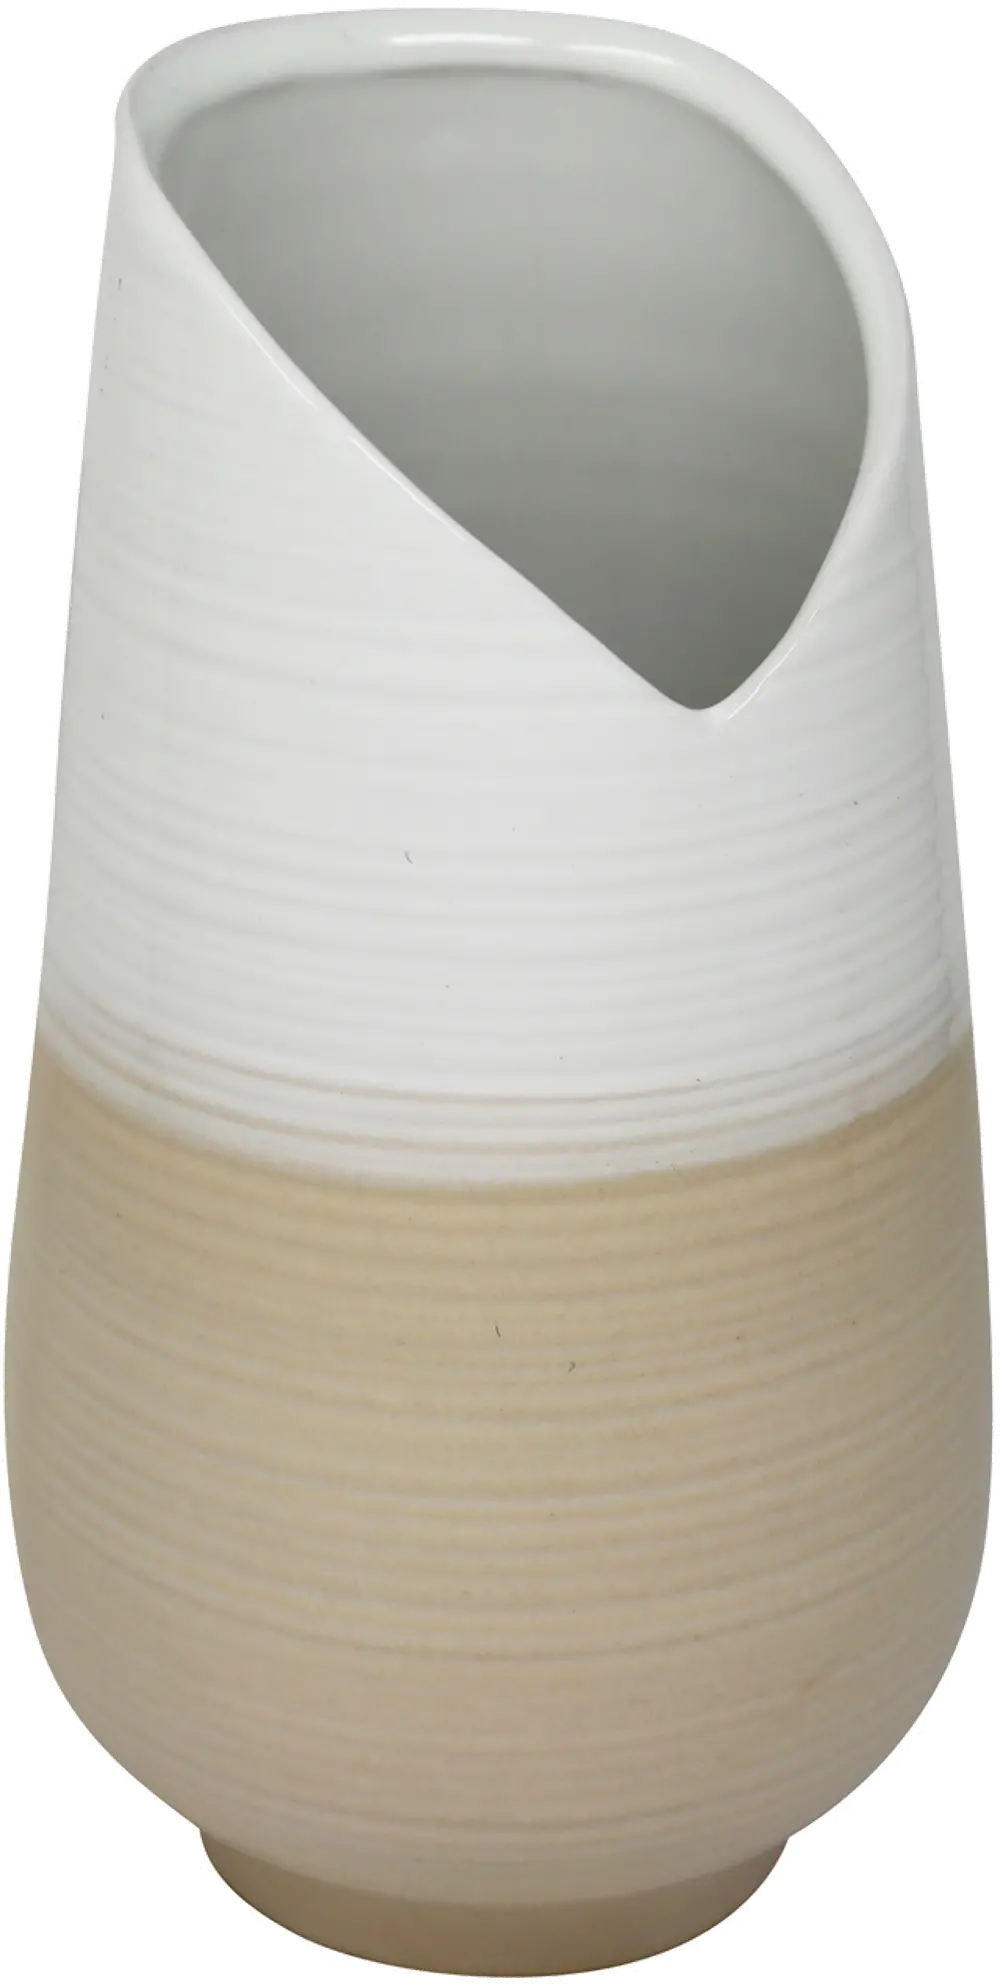 10 Inch White and Beige Two Tone Ceramic Vase-1